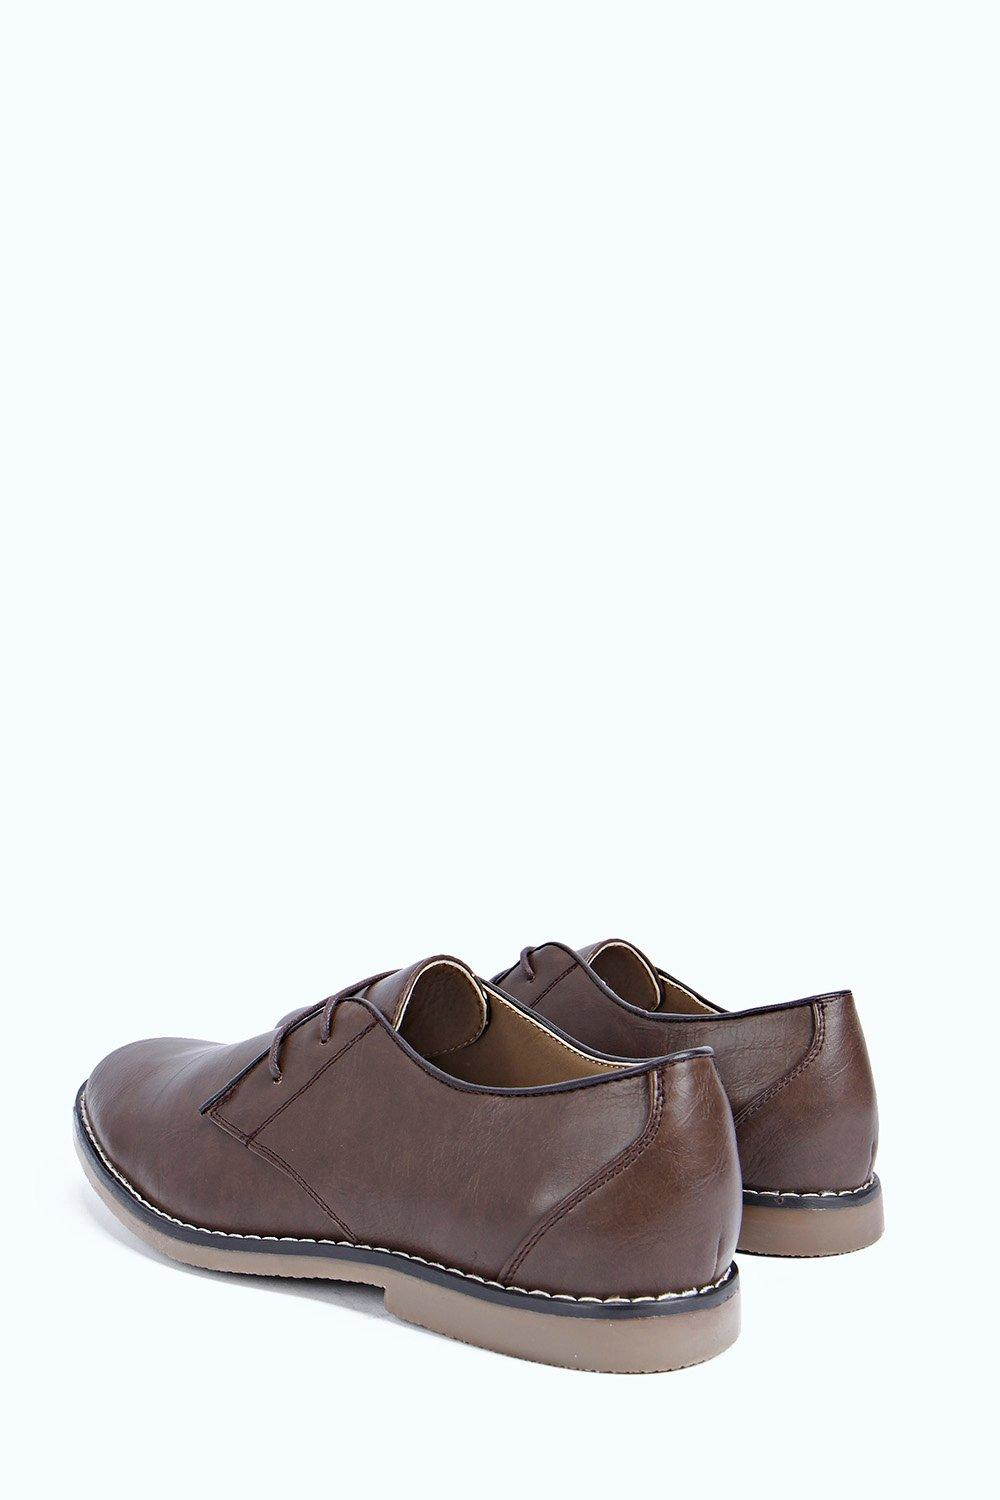 Boohoo Leather Look Desert Shoes in Brown for Men - Lyst